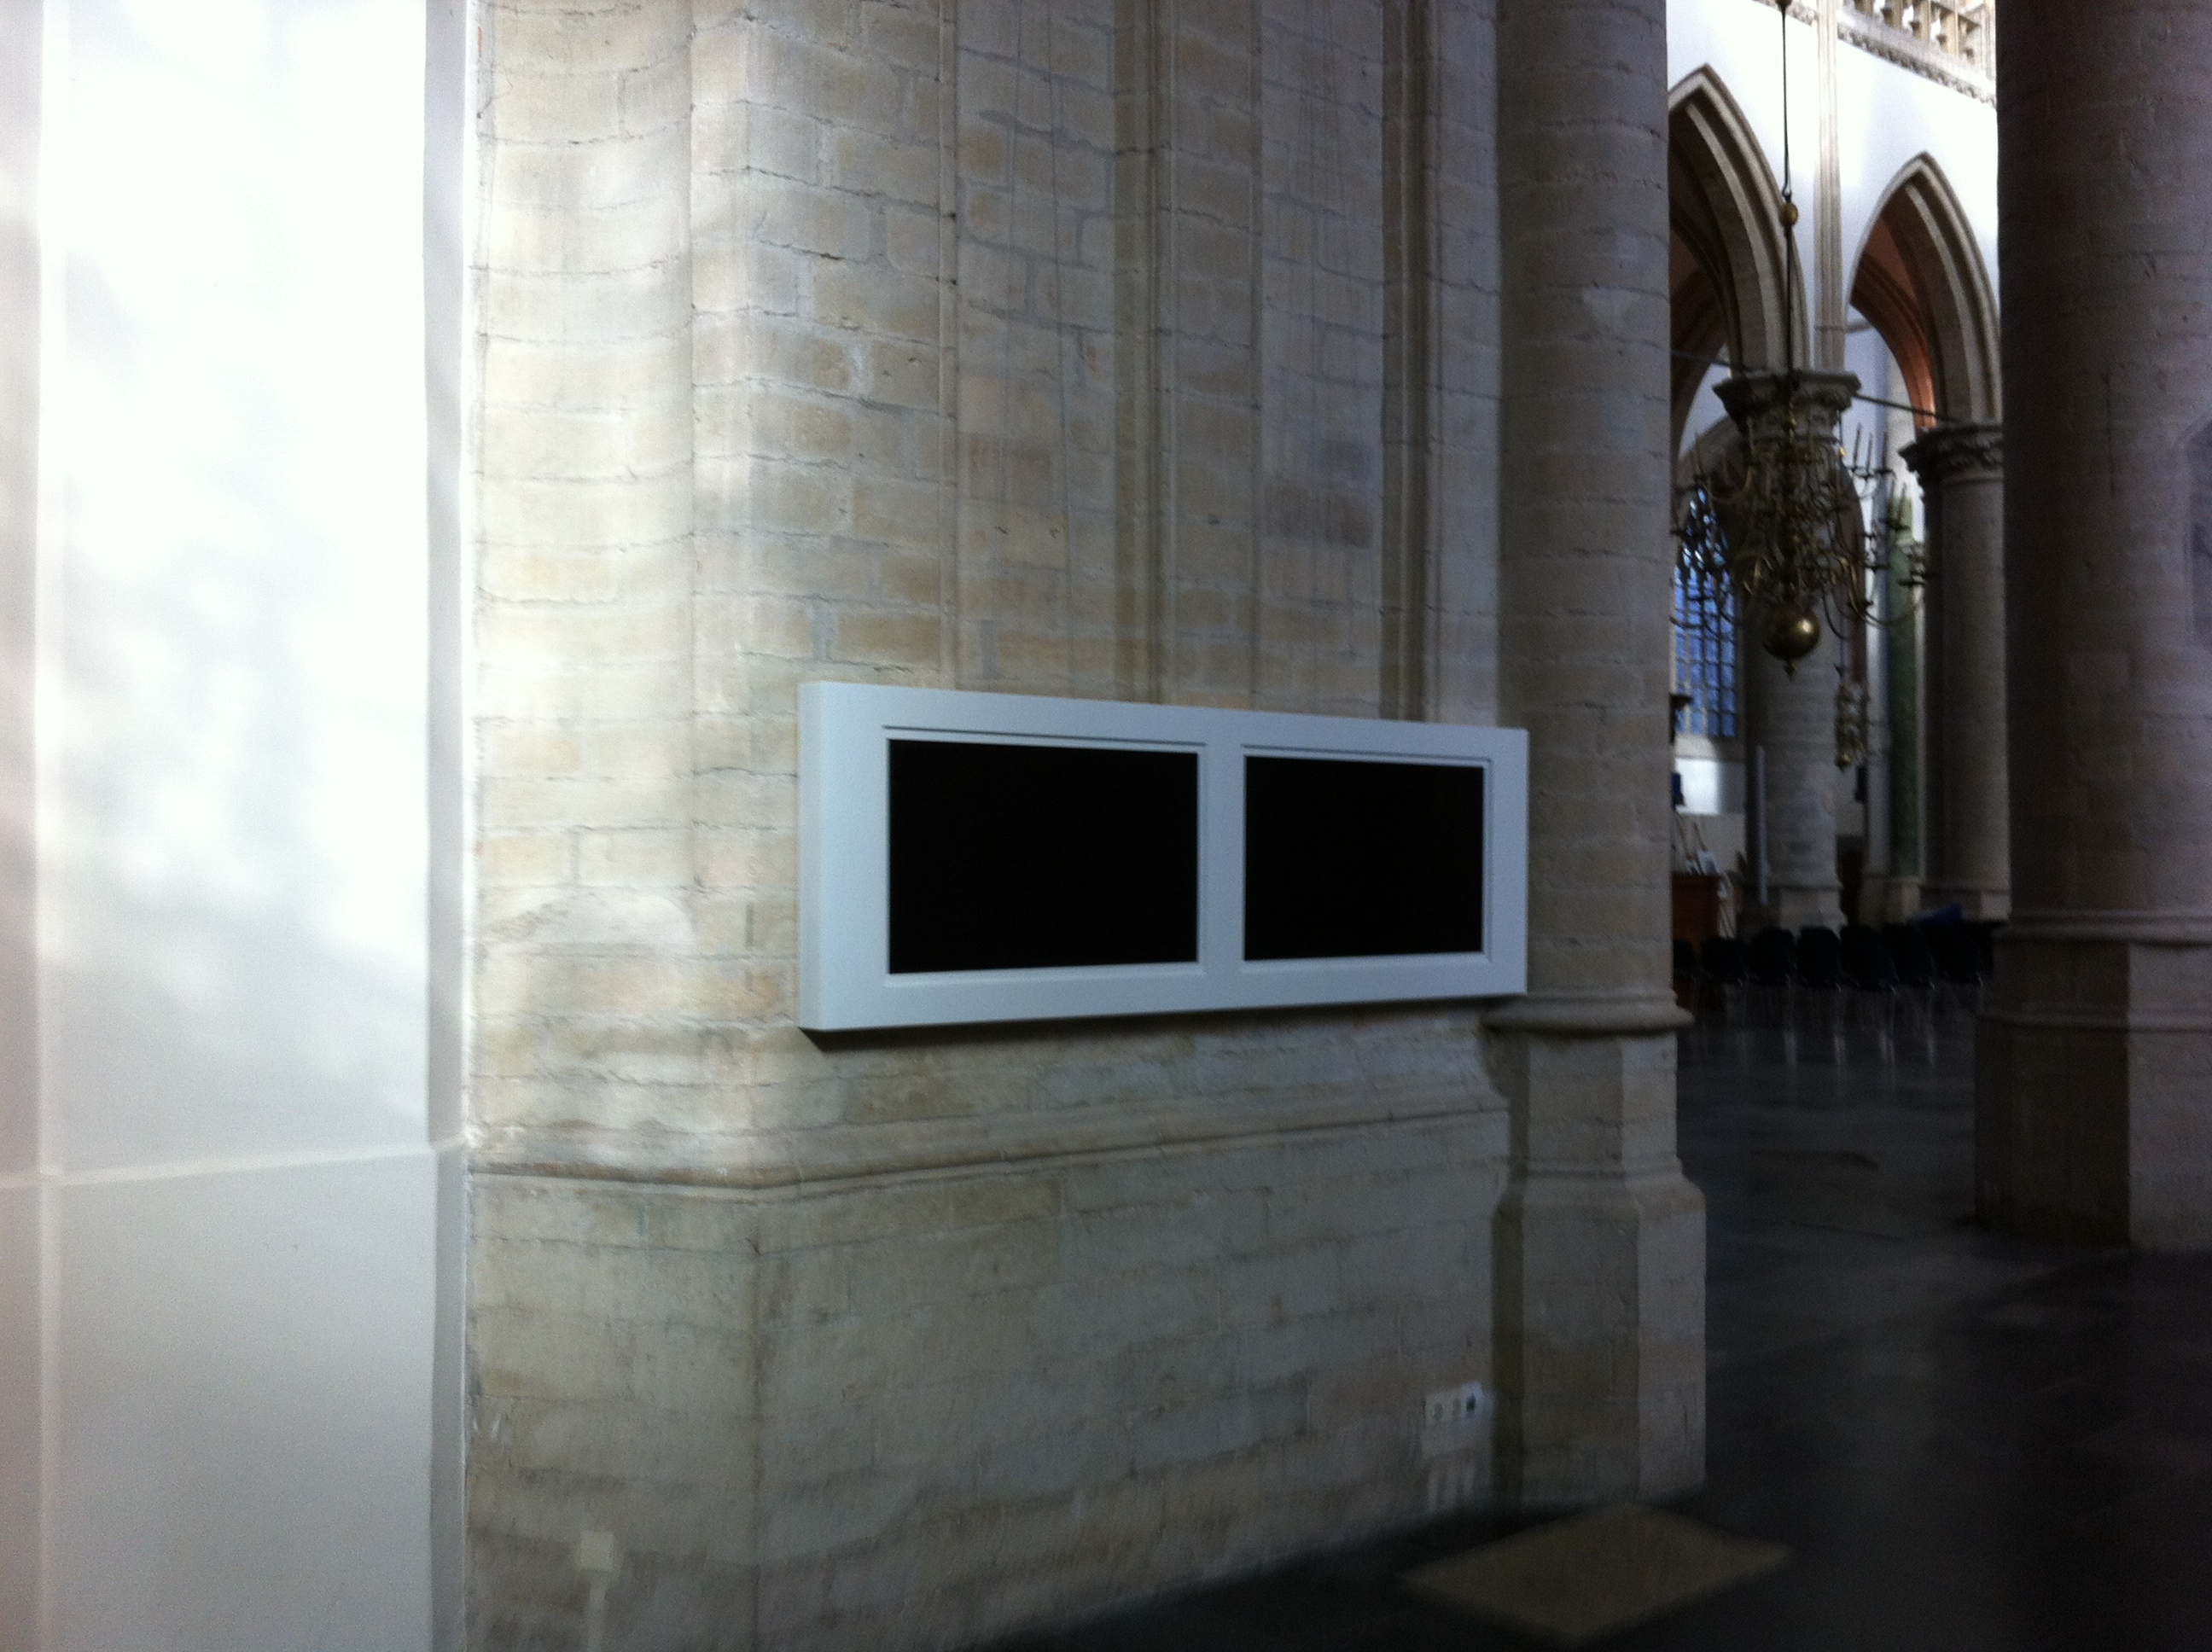 Exhibition "600 years of Nassaus and the Great Church" monitor display - from 2013 till ...